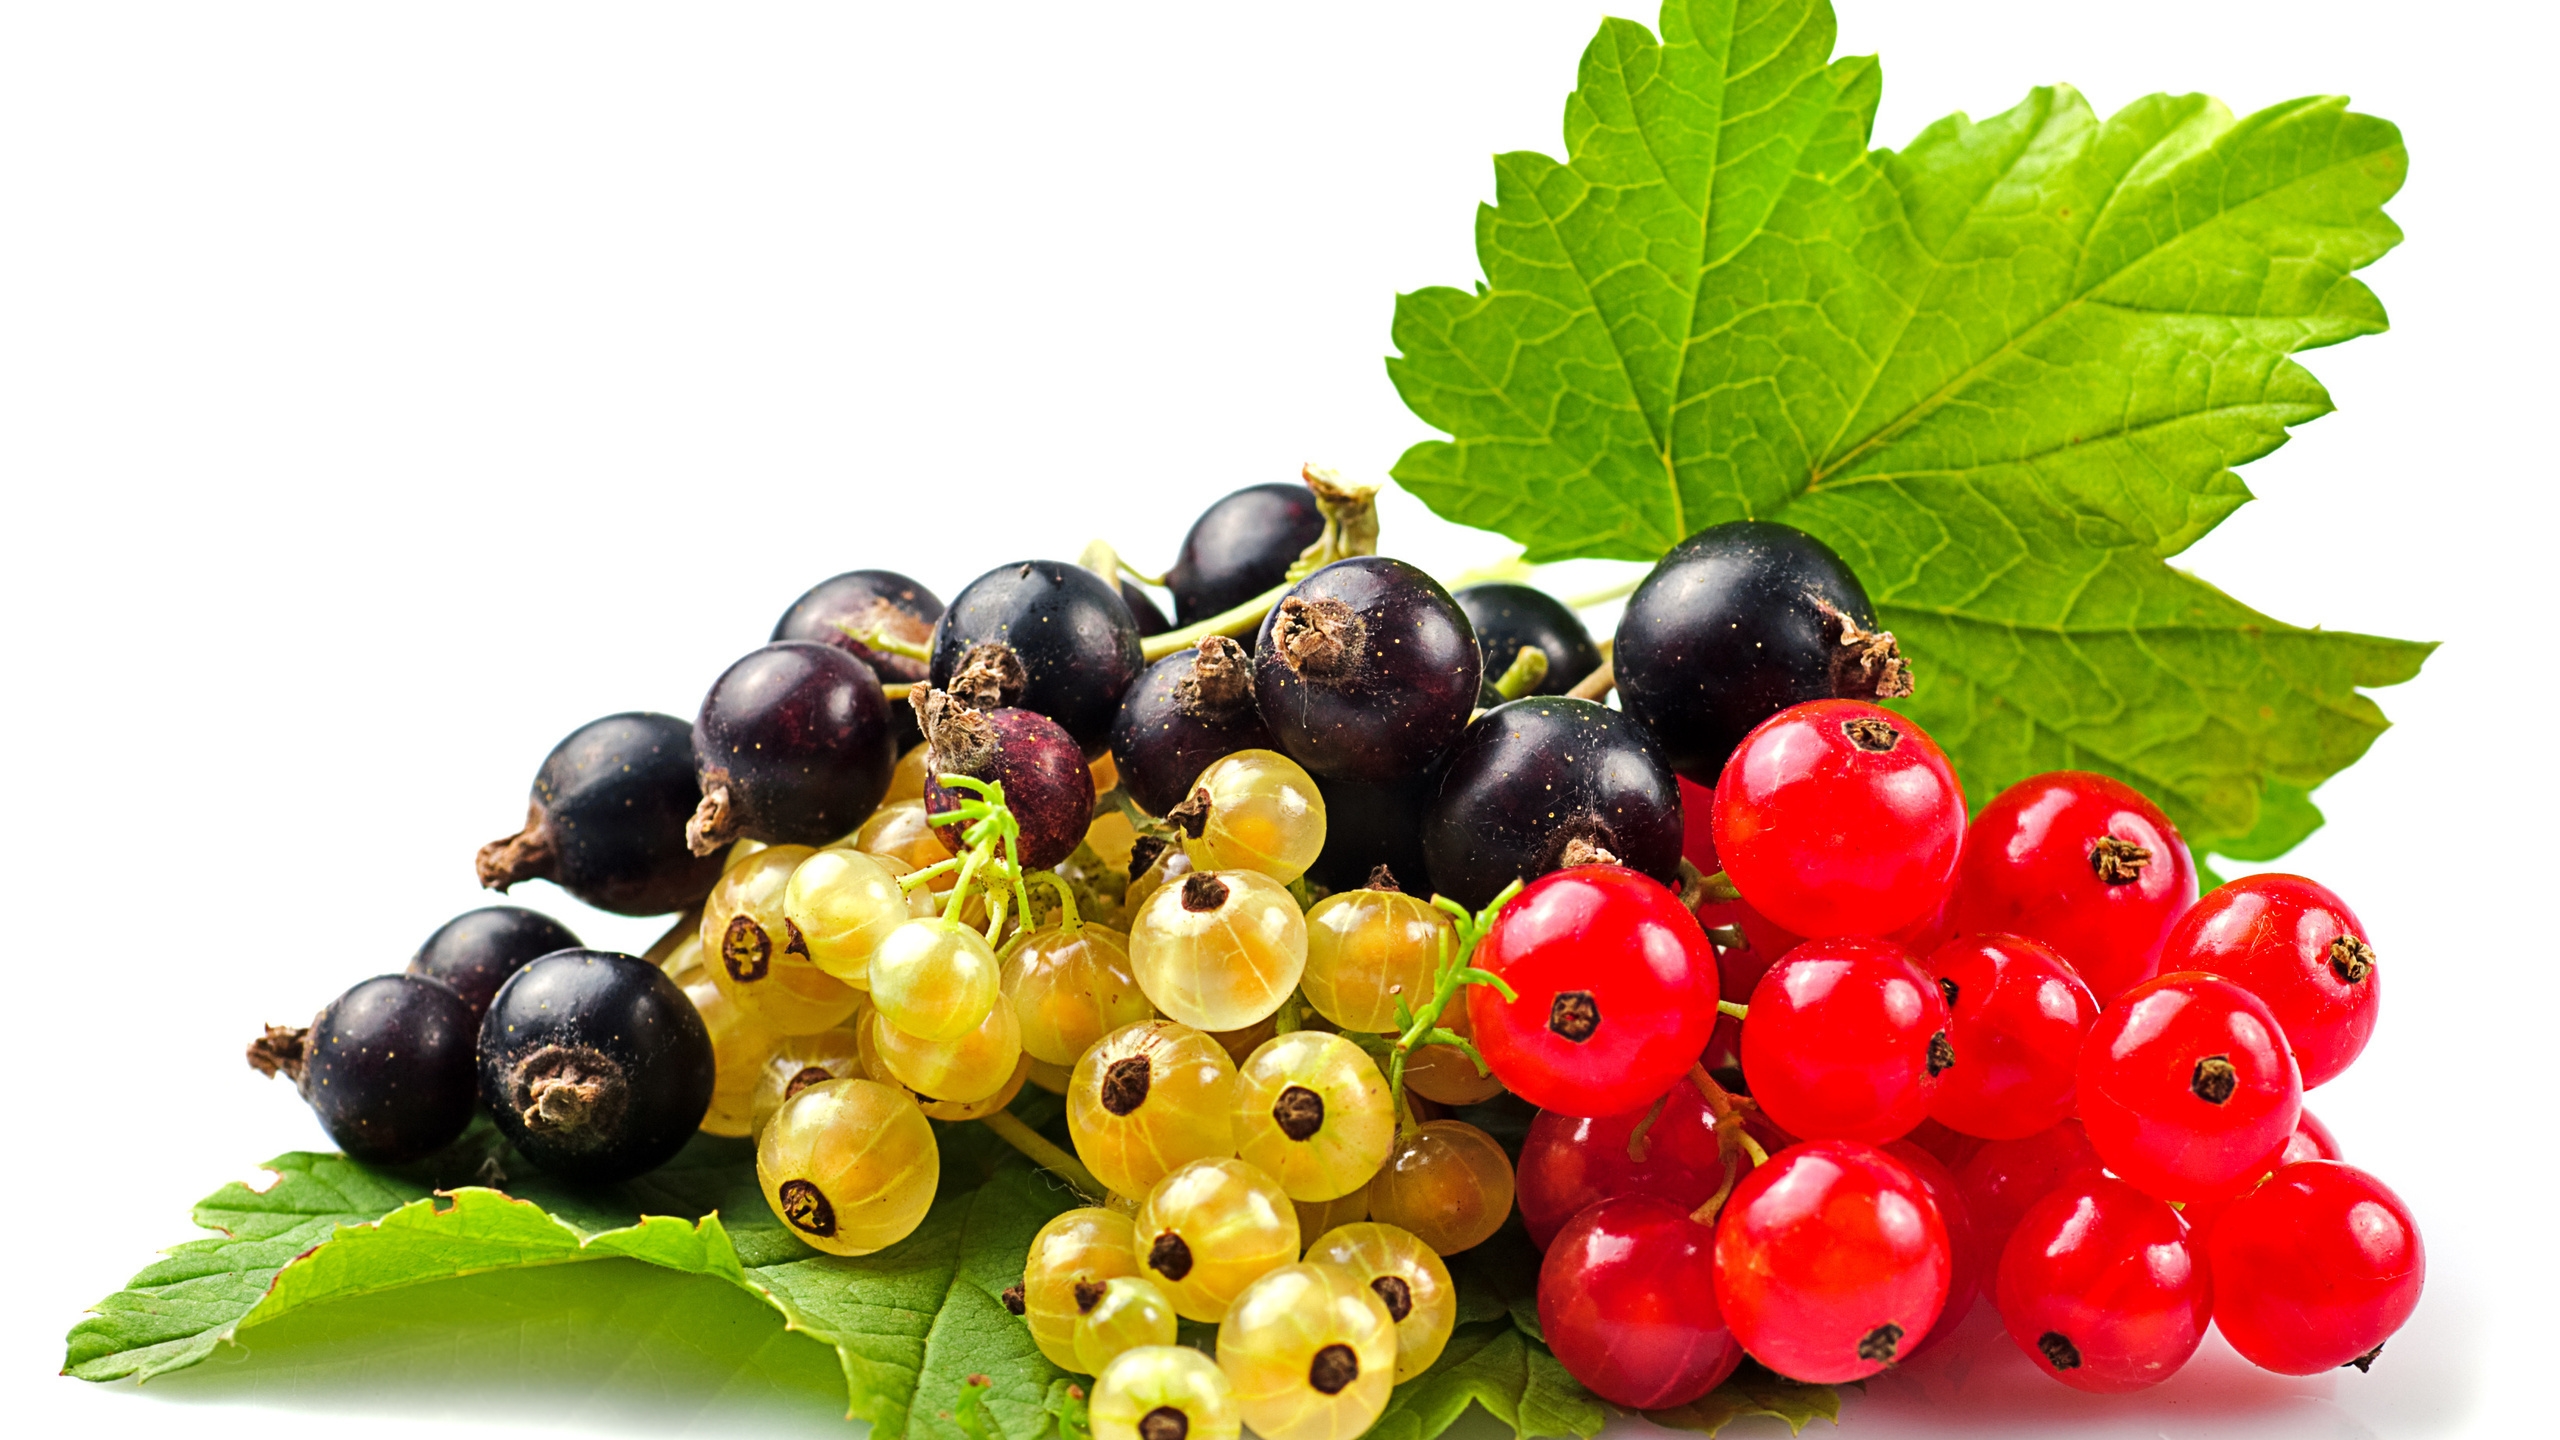 Currants Selection for 2560x1440 HDTV resolution